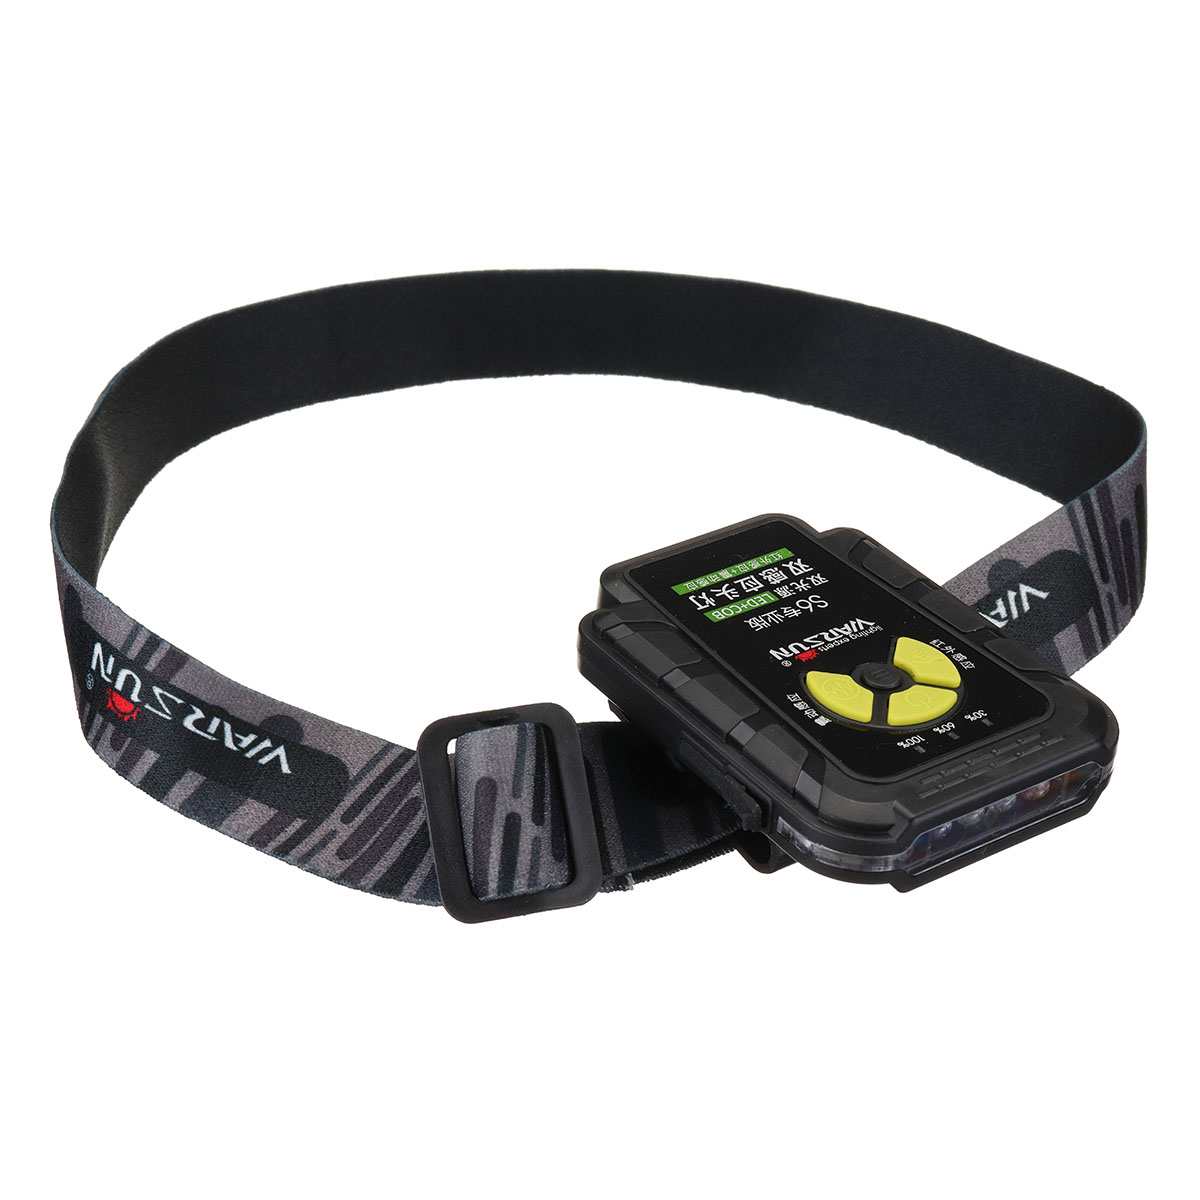 4-LED-Clip-on-Cap-Headlamp-2-Modes-USB-Rechargeable-Work-Light-Camping-Hunting-Torch-Light-1635051